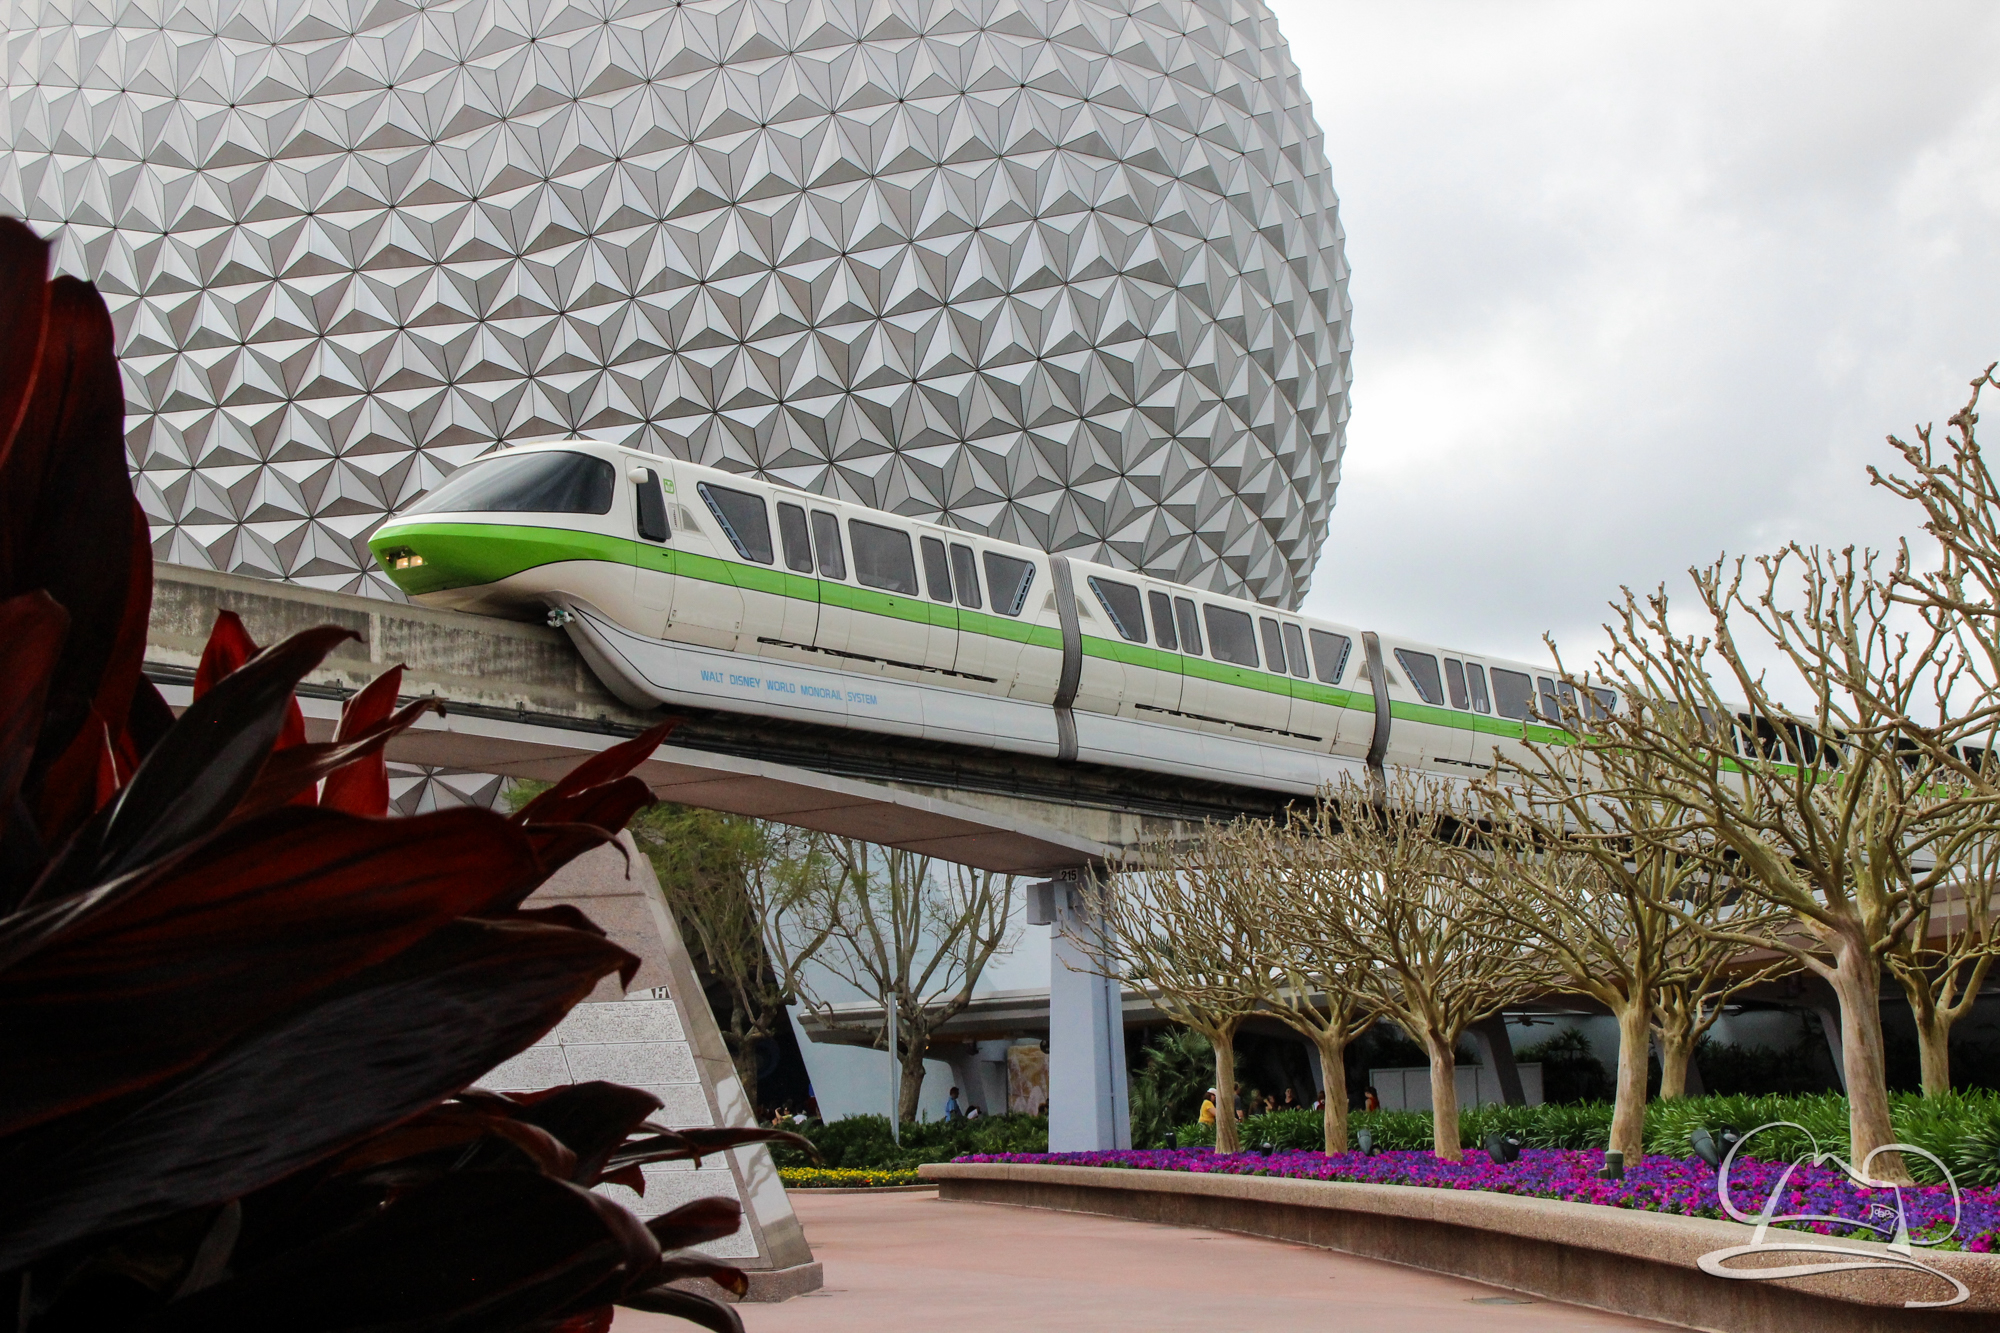 Walt Disney World to Offer Extra FastPasses to Guests For an Additional Cost